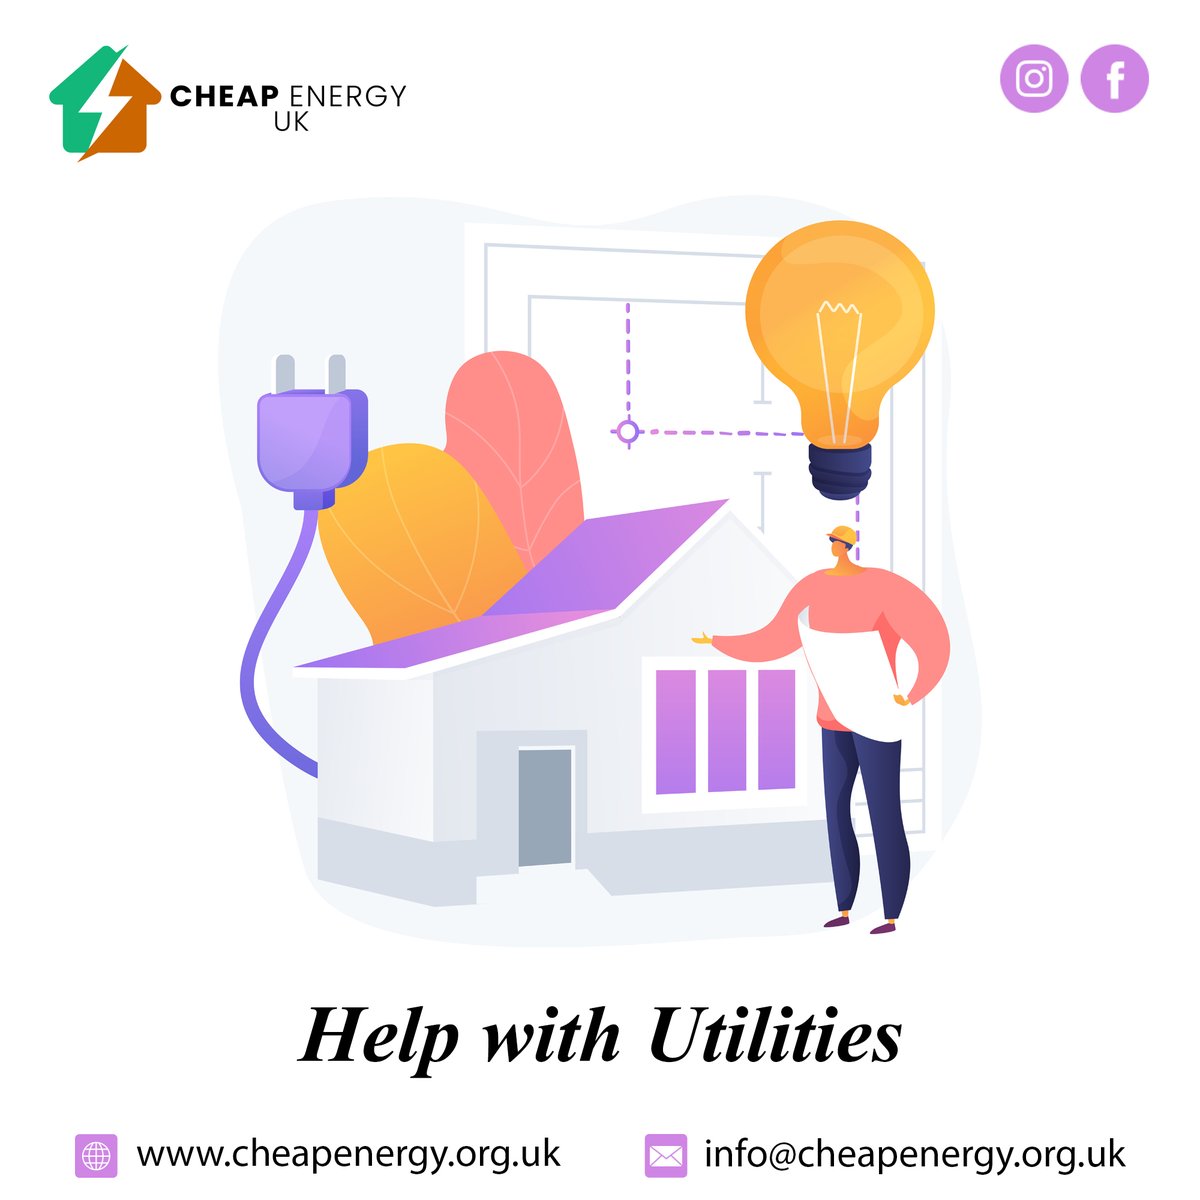 𝙃𝙚𝙡𝙥 𝙒𝙞𝙩𝙝 𝙐𝙩𝙞𝙡𝙞𝙩𝙞𝙚𝙨!!

Would you like lower utility costs? The top bundling services are offered by Cheapenergy UK. You can reduce your energy usage at home and save time and money.
#utilites #reducebills #energysupplier #lowerbills #savemoney #lowercosts